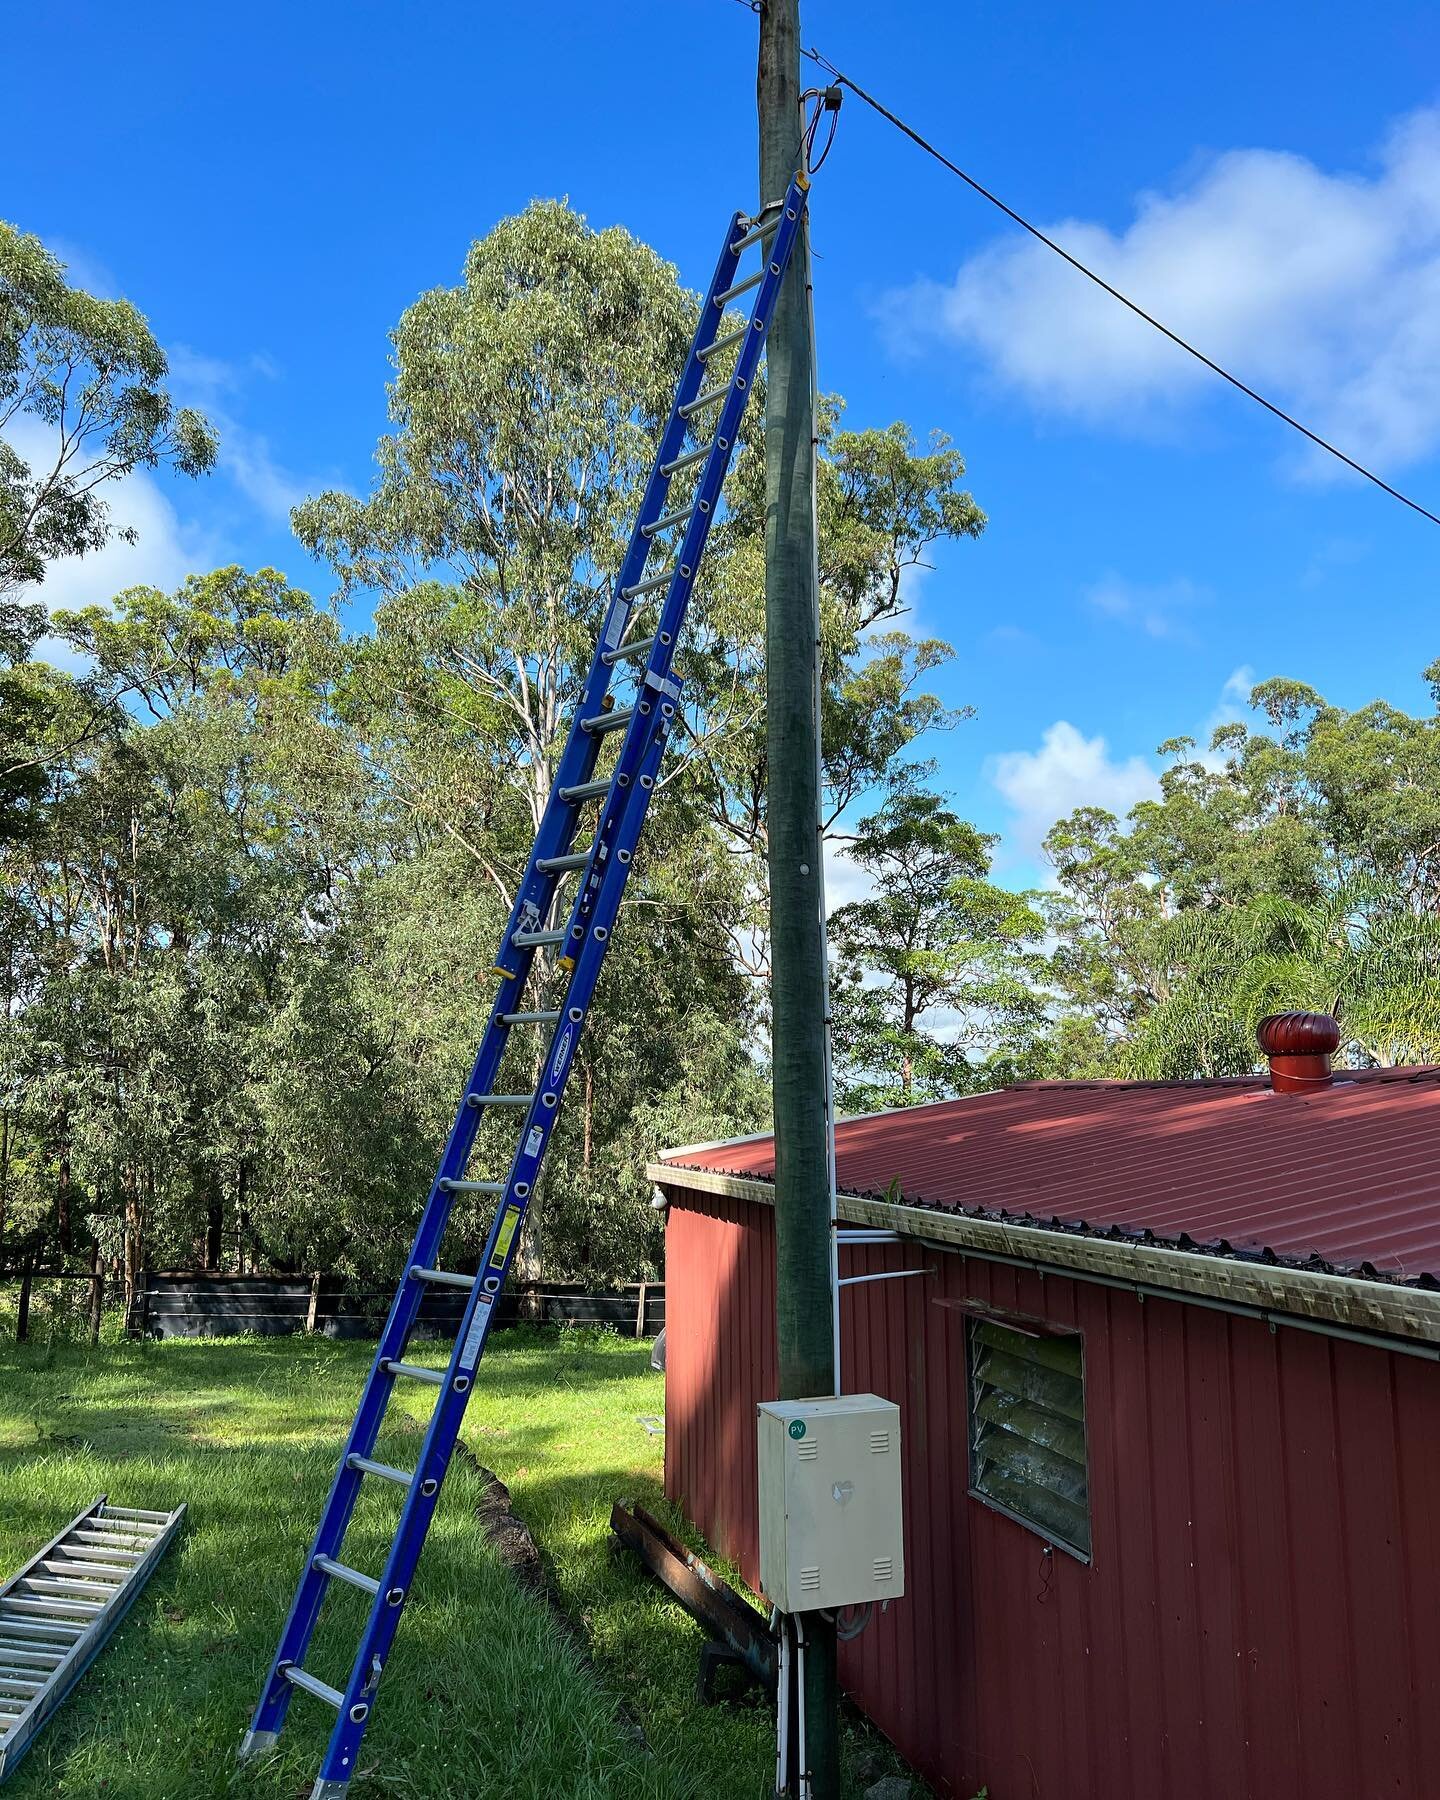 One of the many emergency call outs we had at Landsborough over the past week. Tree had fallen onto powerline, we worked with Energex to restore power as quickly &amp; safely as possible⚡️

Remember to never go near fallen powerlines 🚫

Call our tea